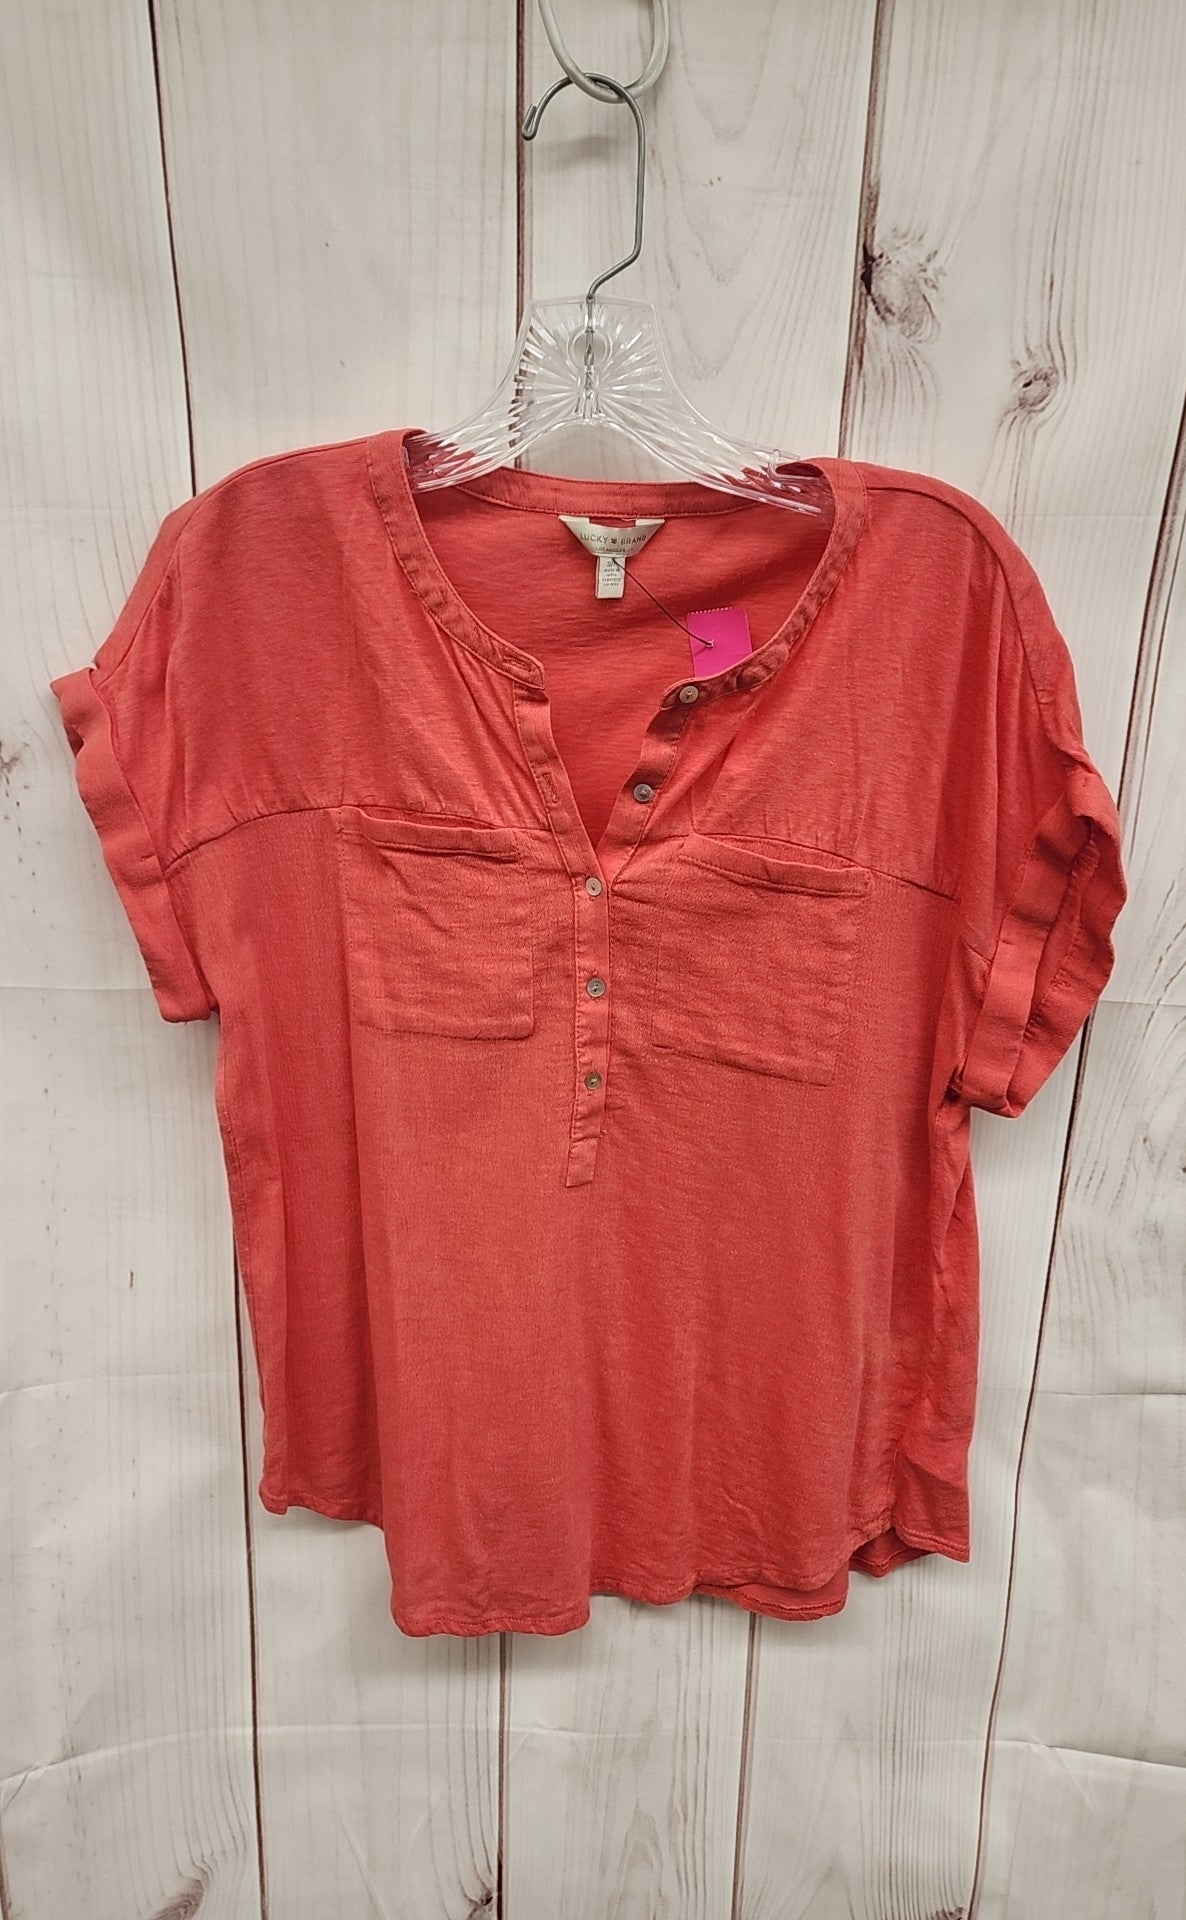 Lucky Brand Women's Size S Red Short Sleeve Top